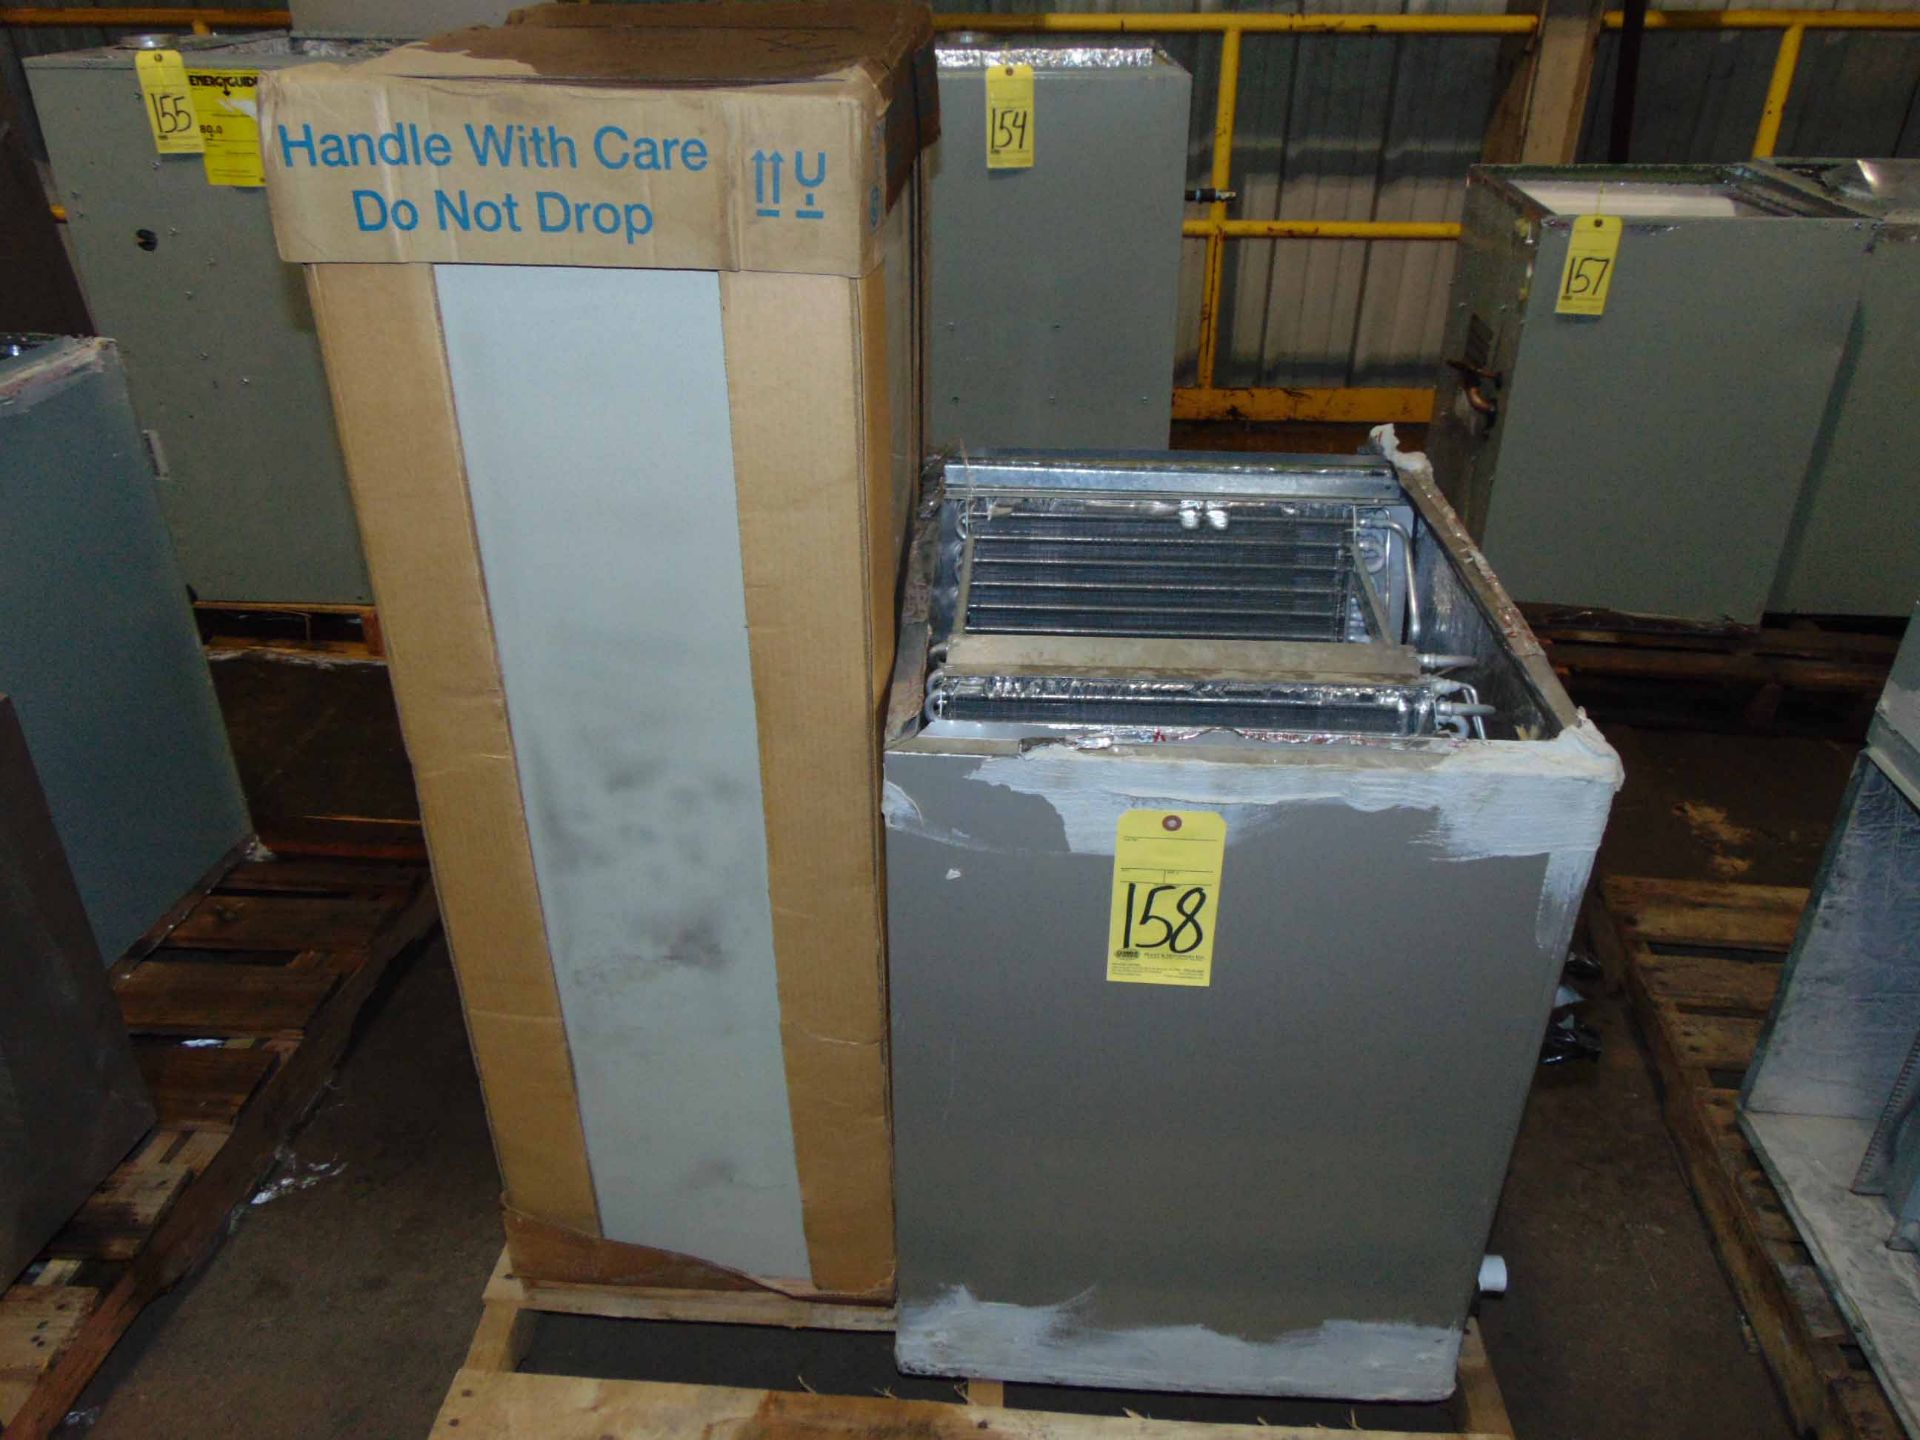 LOT CONSISTING OF: Carrier heat pump & condenser unit (on one pallet)